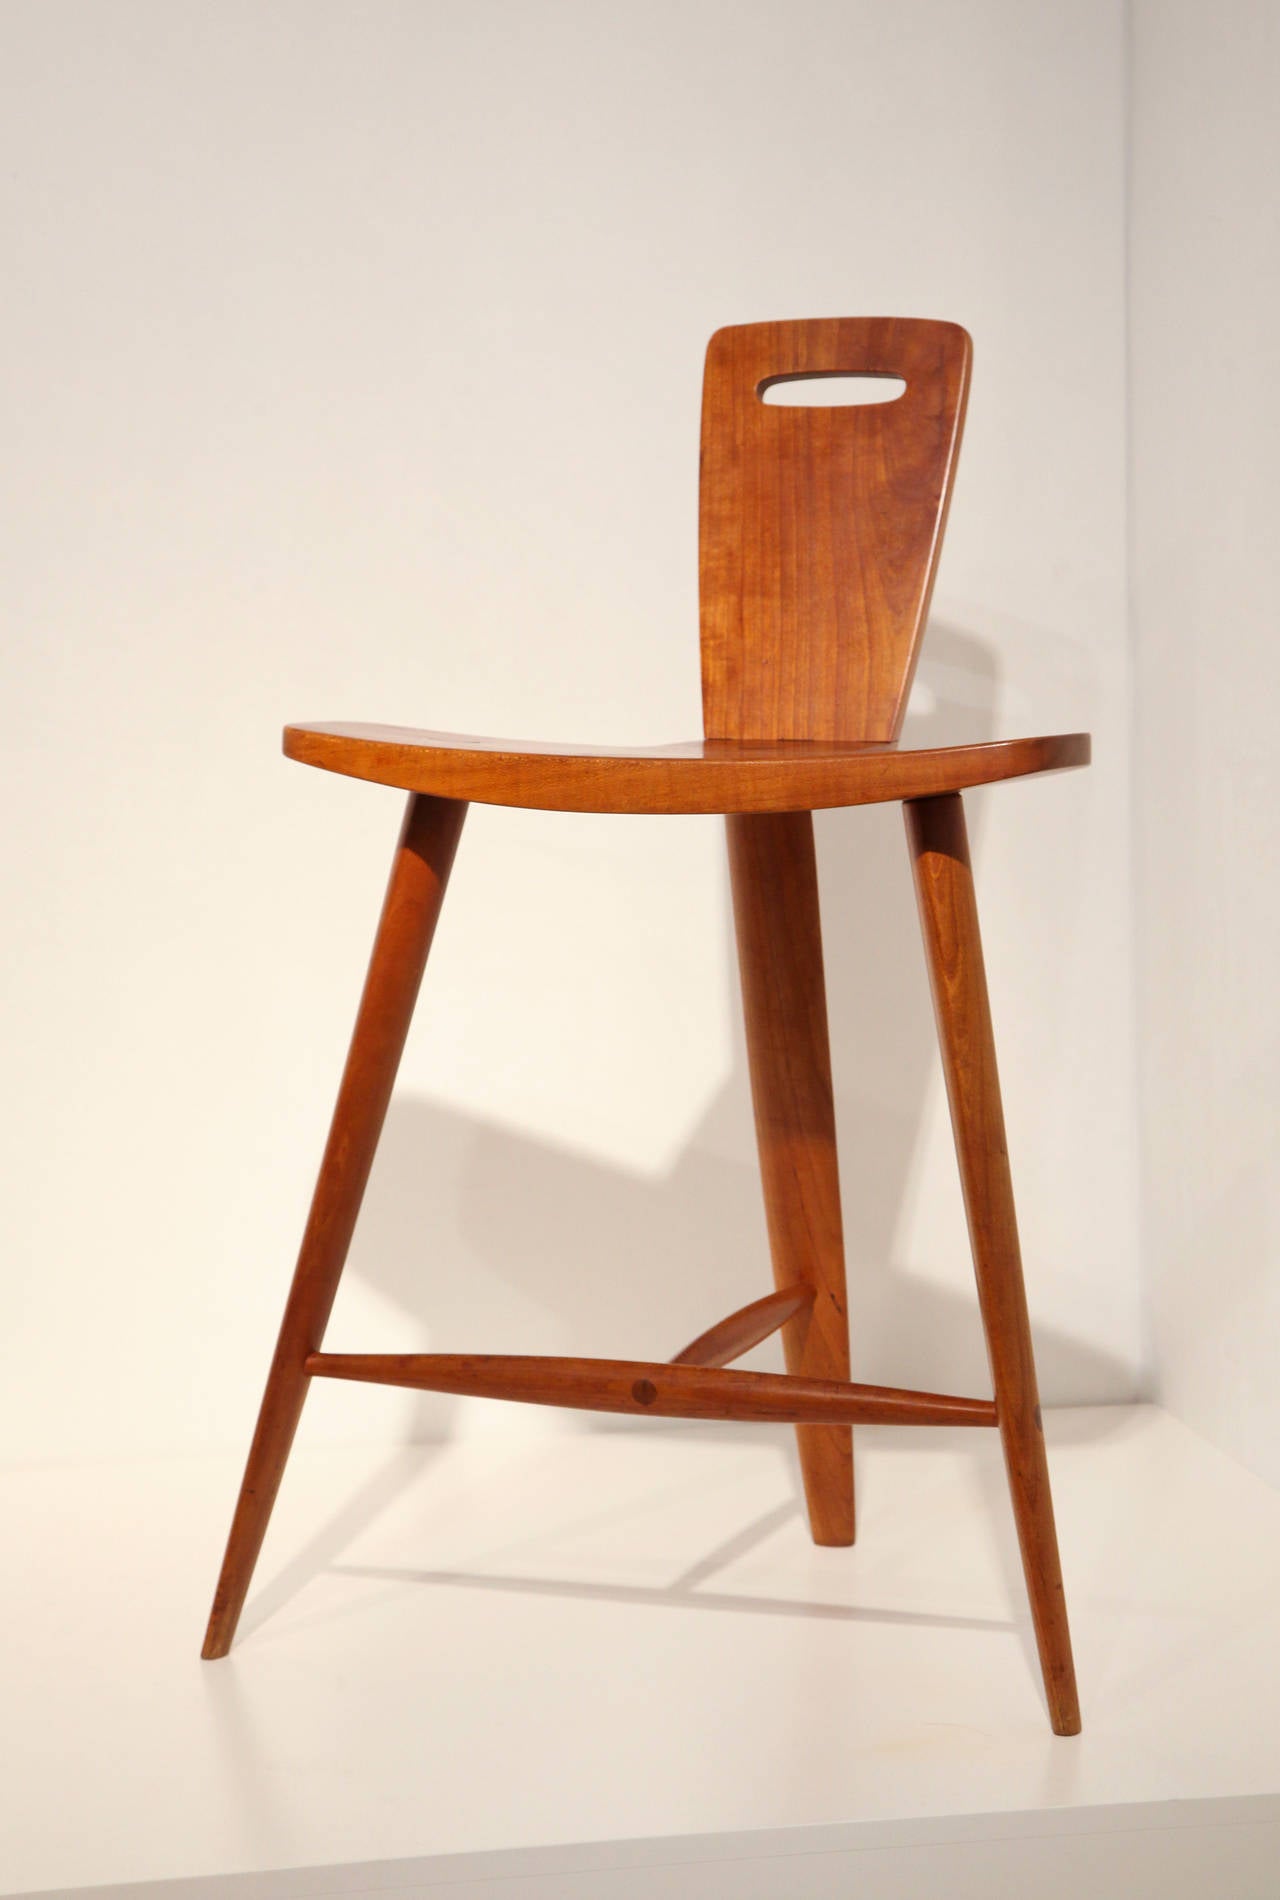 Iconic stool by Tage Frid that is in several museum collections - Museum of Fine Arts Boston, RISD Museum, Yale Museum and Renwick Gallery.  With the exception of 2 that are known to be in private collections, all other examples are in the Frid